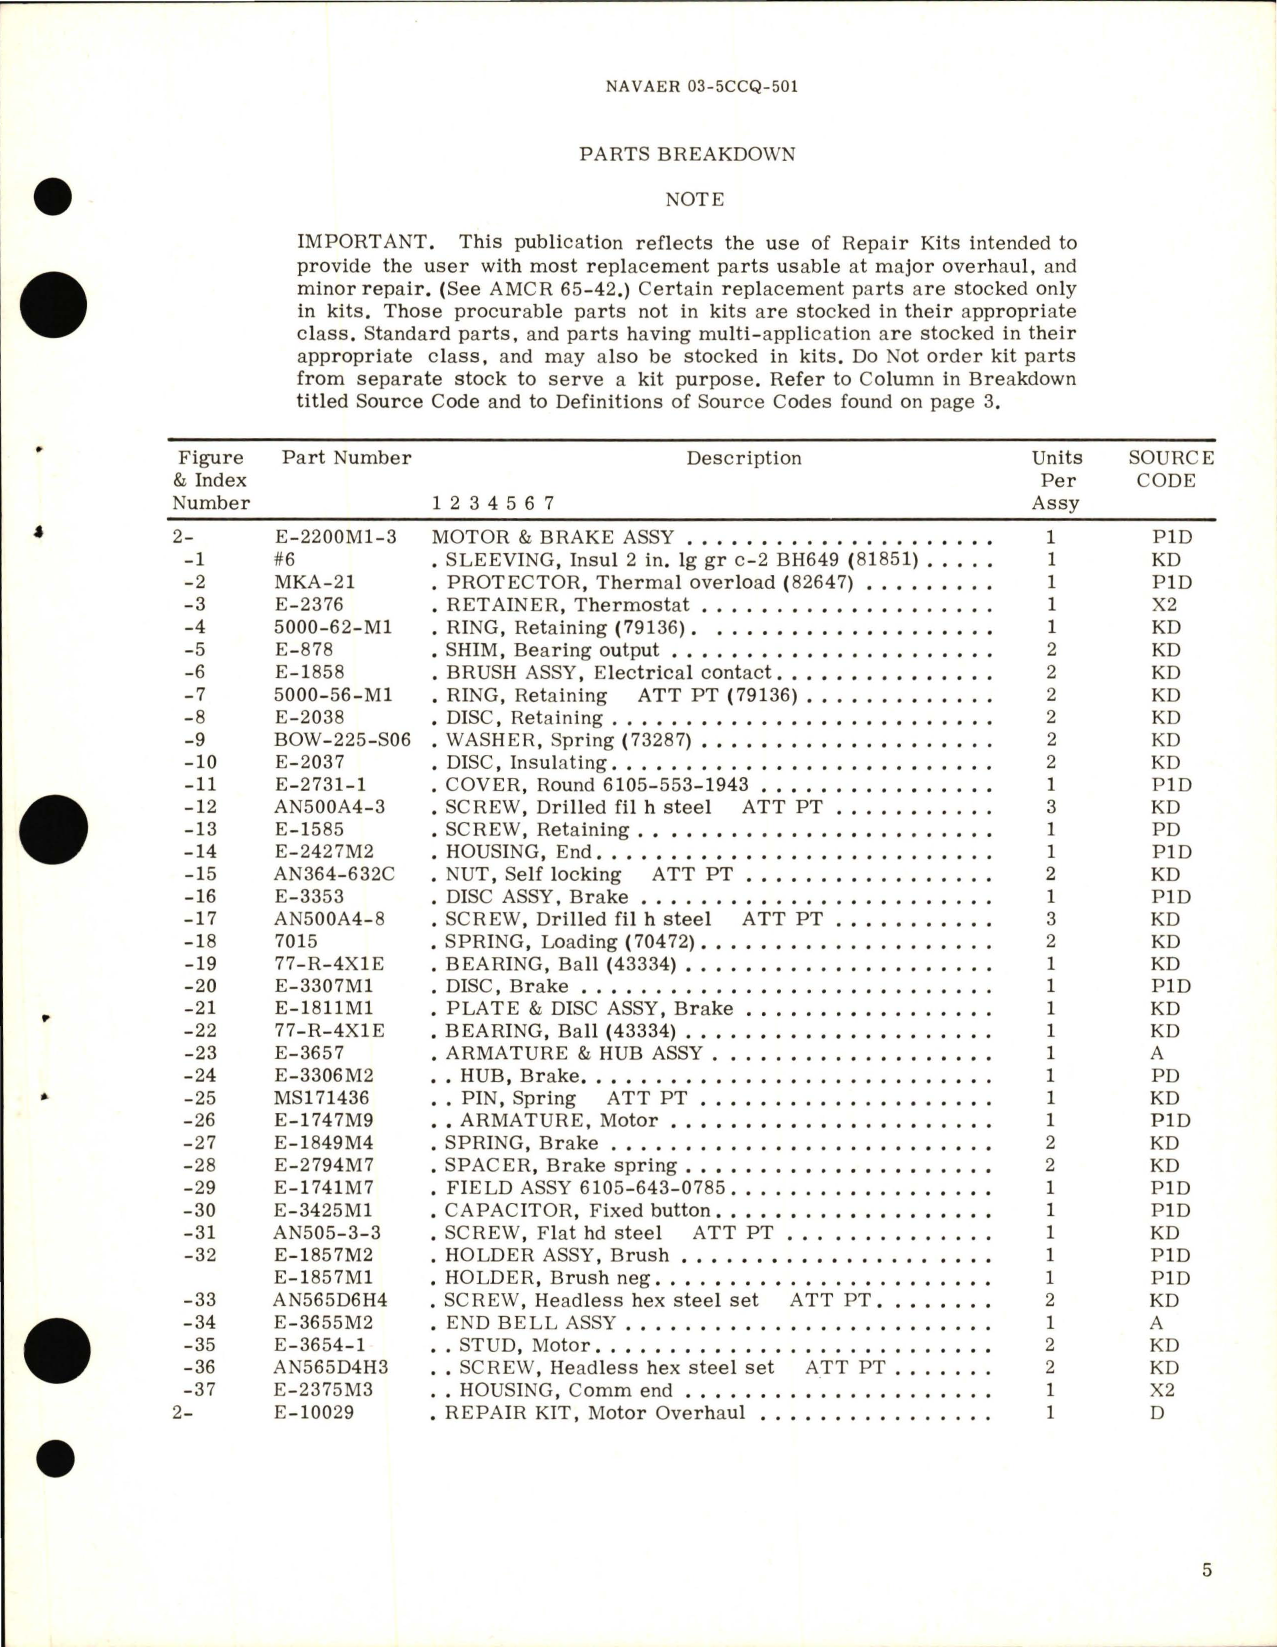 Sample page 5 from AirCorps Library document: Overhaul Instructions with Parts Breakdown and Motor and Brake Assembly for Model E-2200M1-3